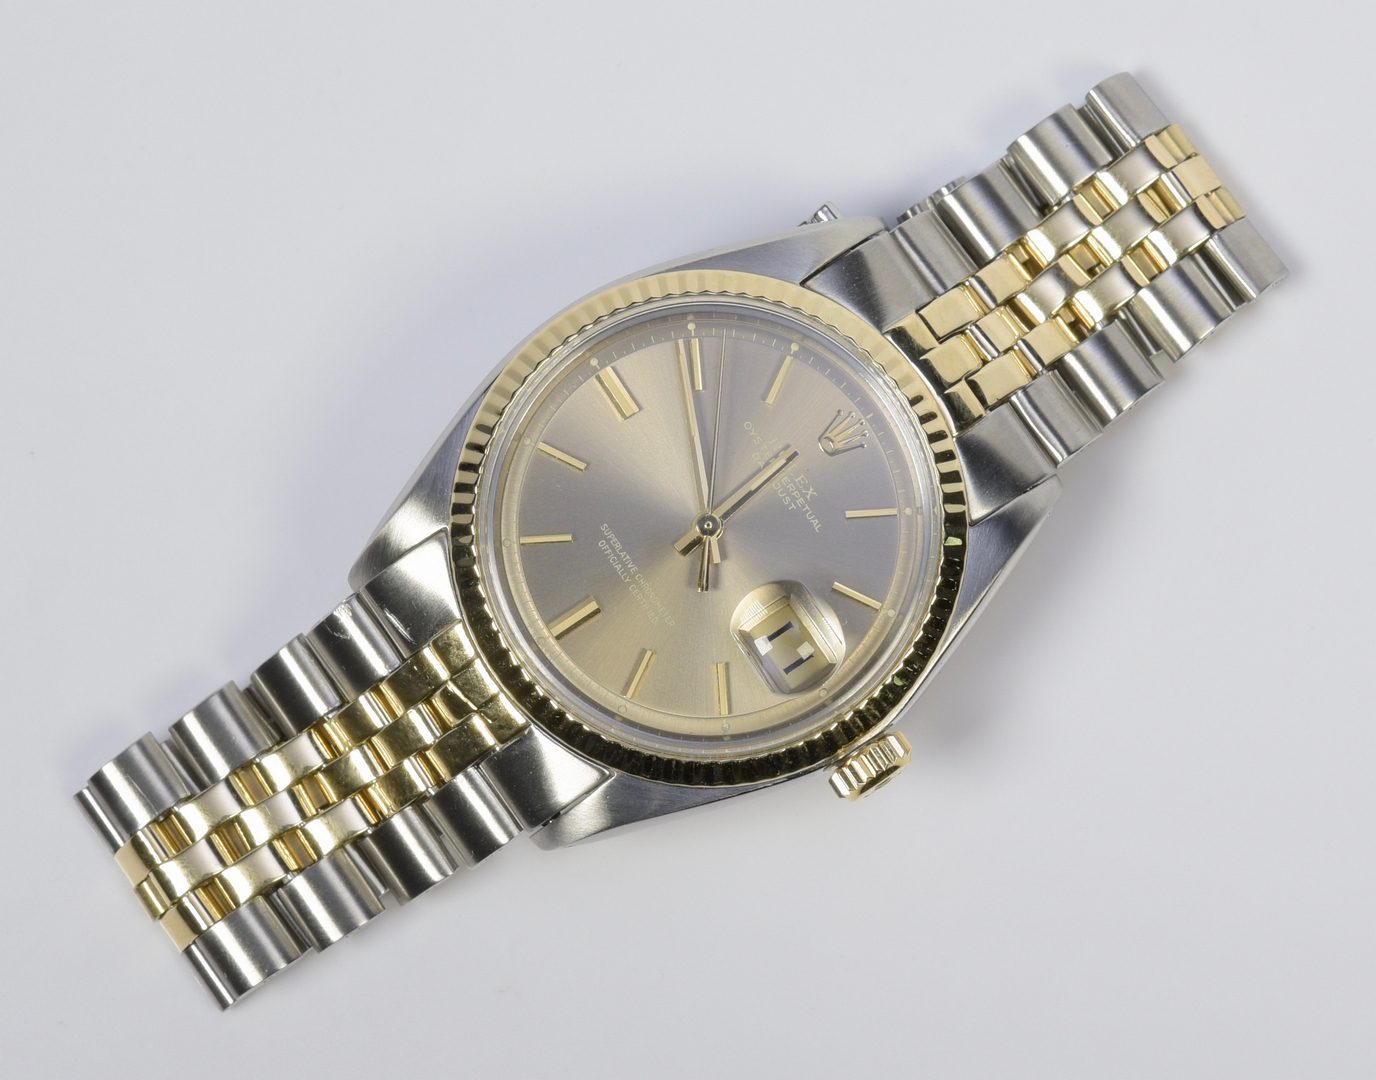 Lot 65: Mens Rolex Oyster Perpetual Datejust Wristwatch